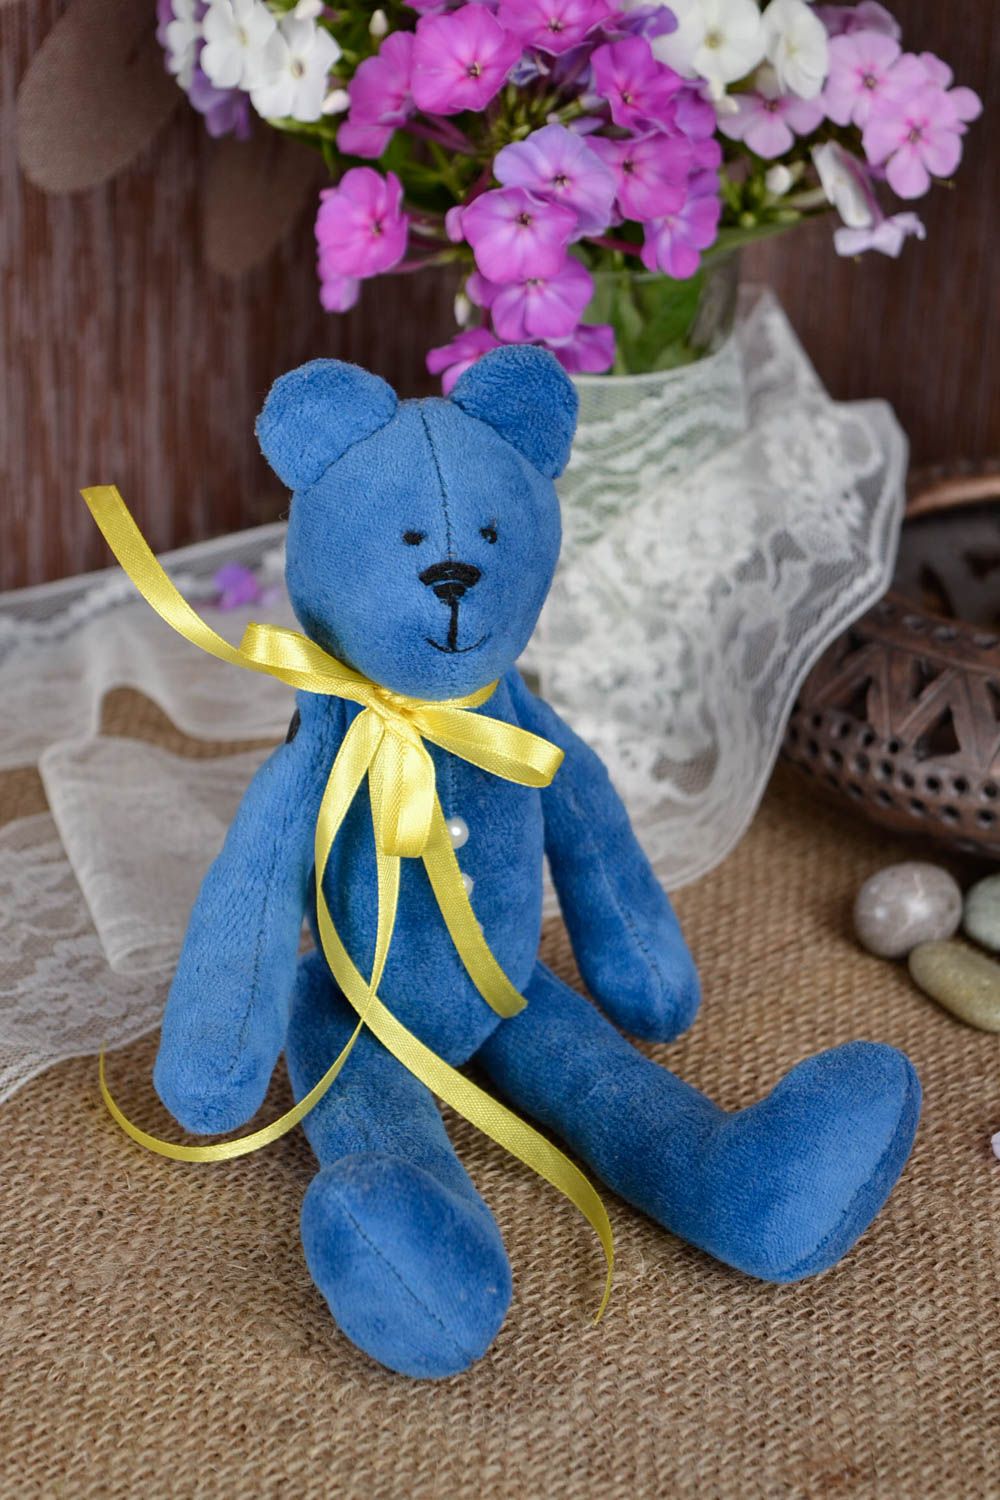 Stuffed toy bear toy handmade gifts homemade toy cool gifts for kids home decor photo 1